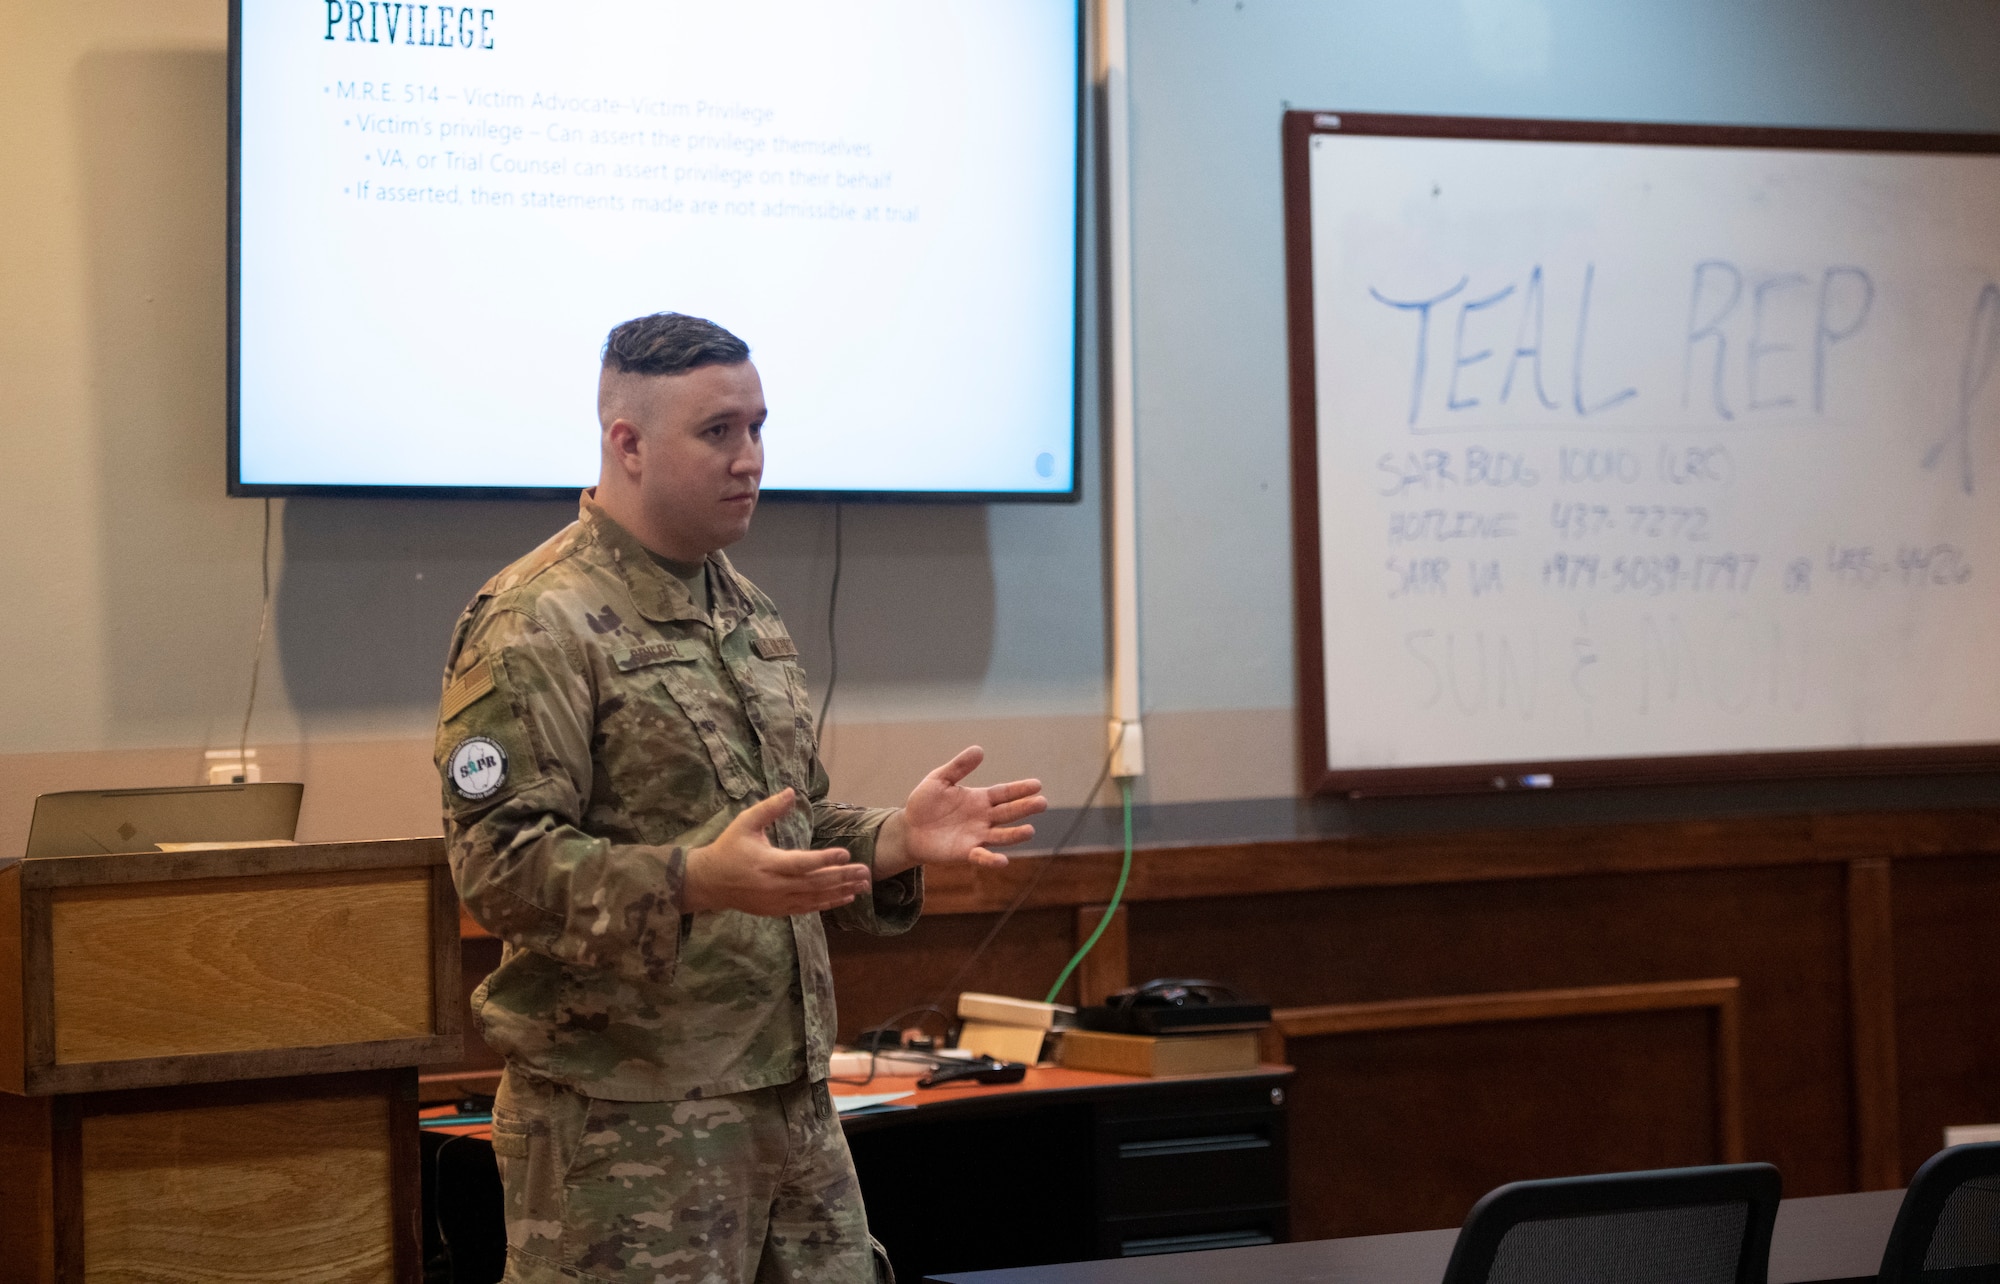 Airman instructs class of military members.